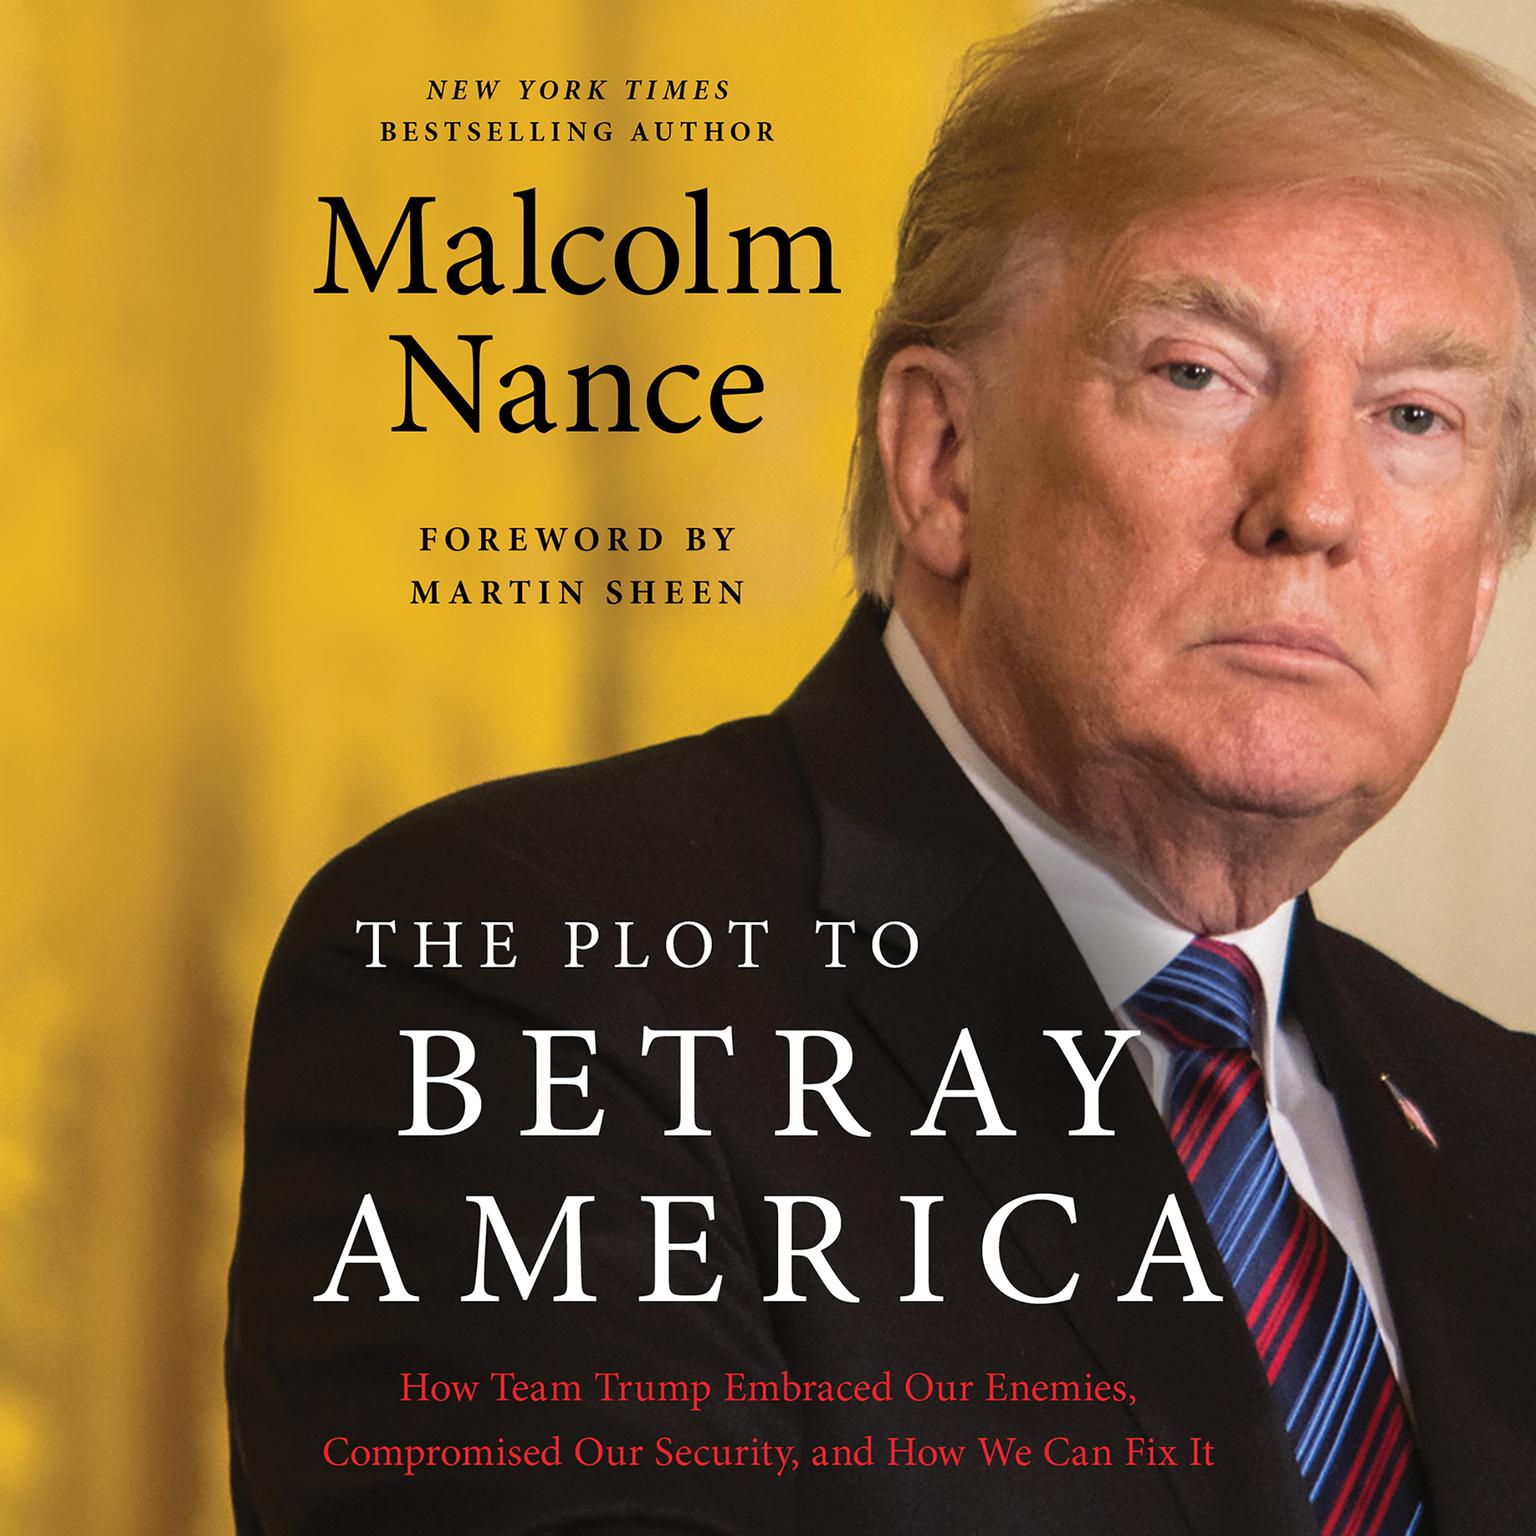 The Plot to Betray America: How Team Trump Embraced Our Enemies, Compromised Our Security, and How We Can Fix It Audiobook, by Malcolm Nance